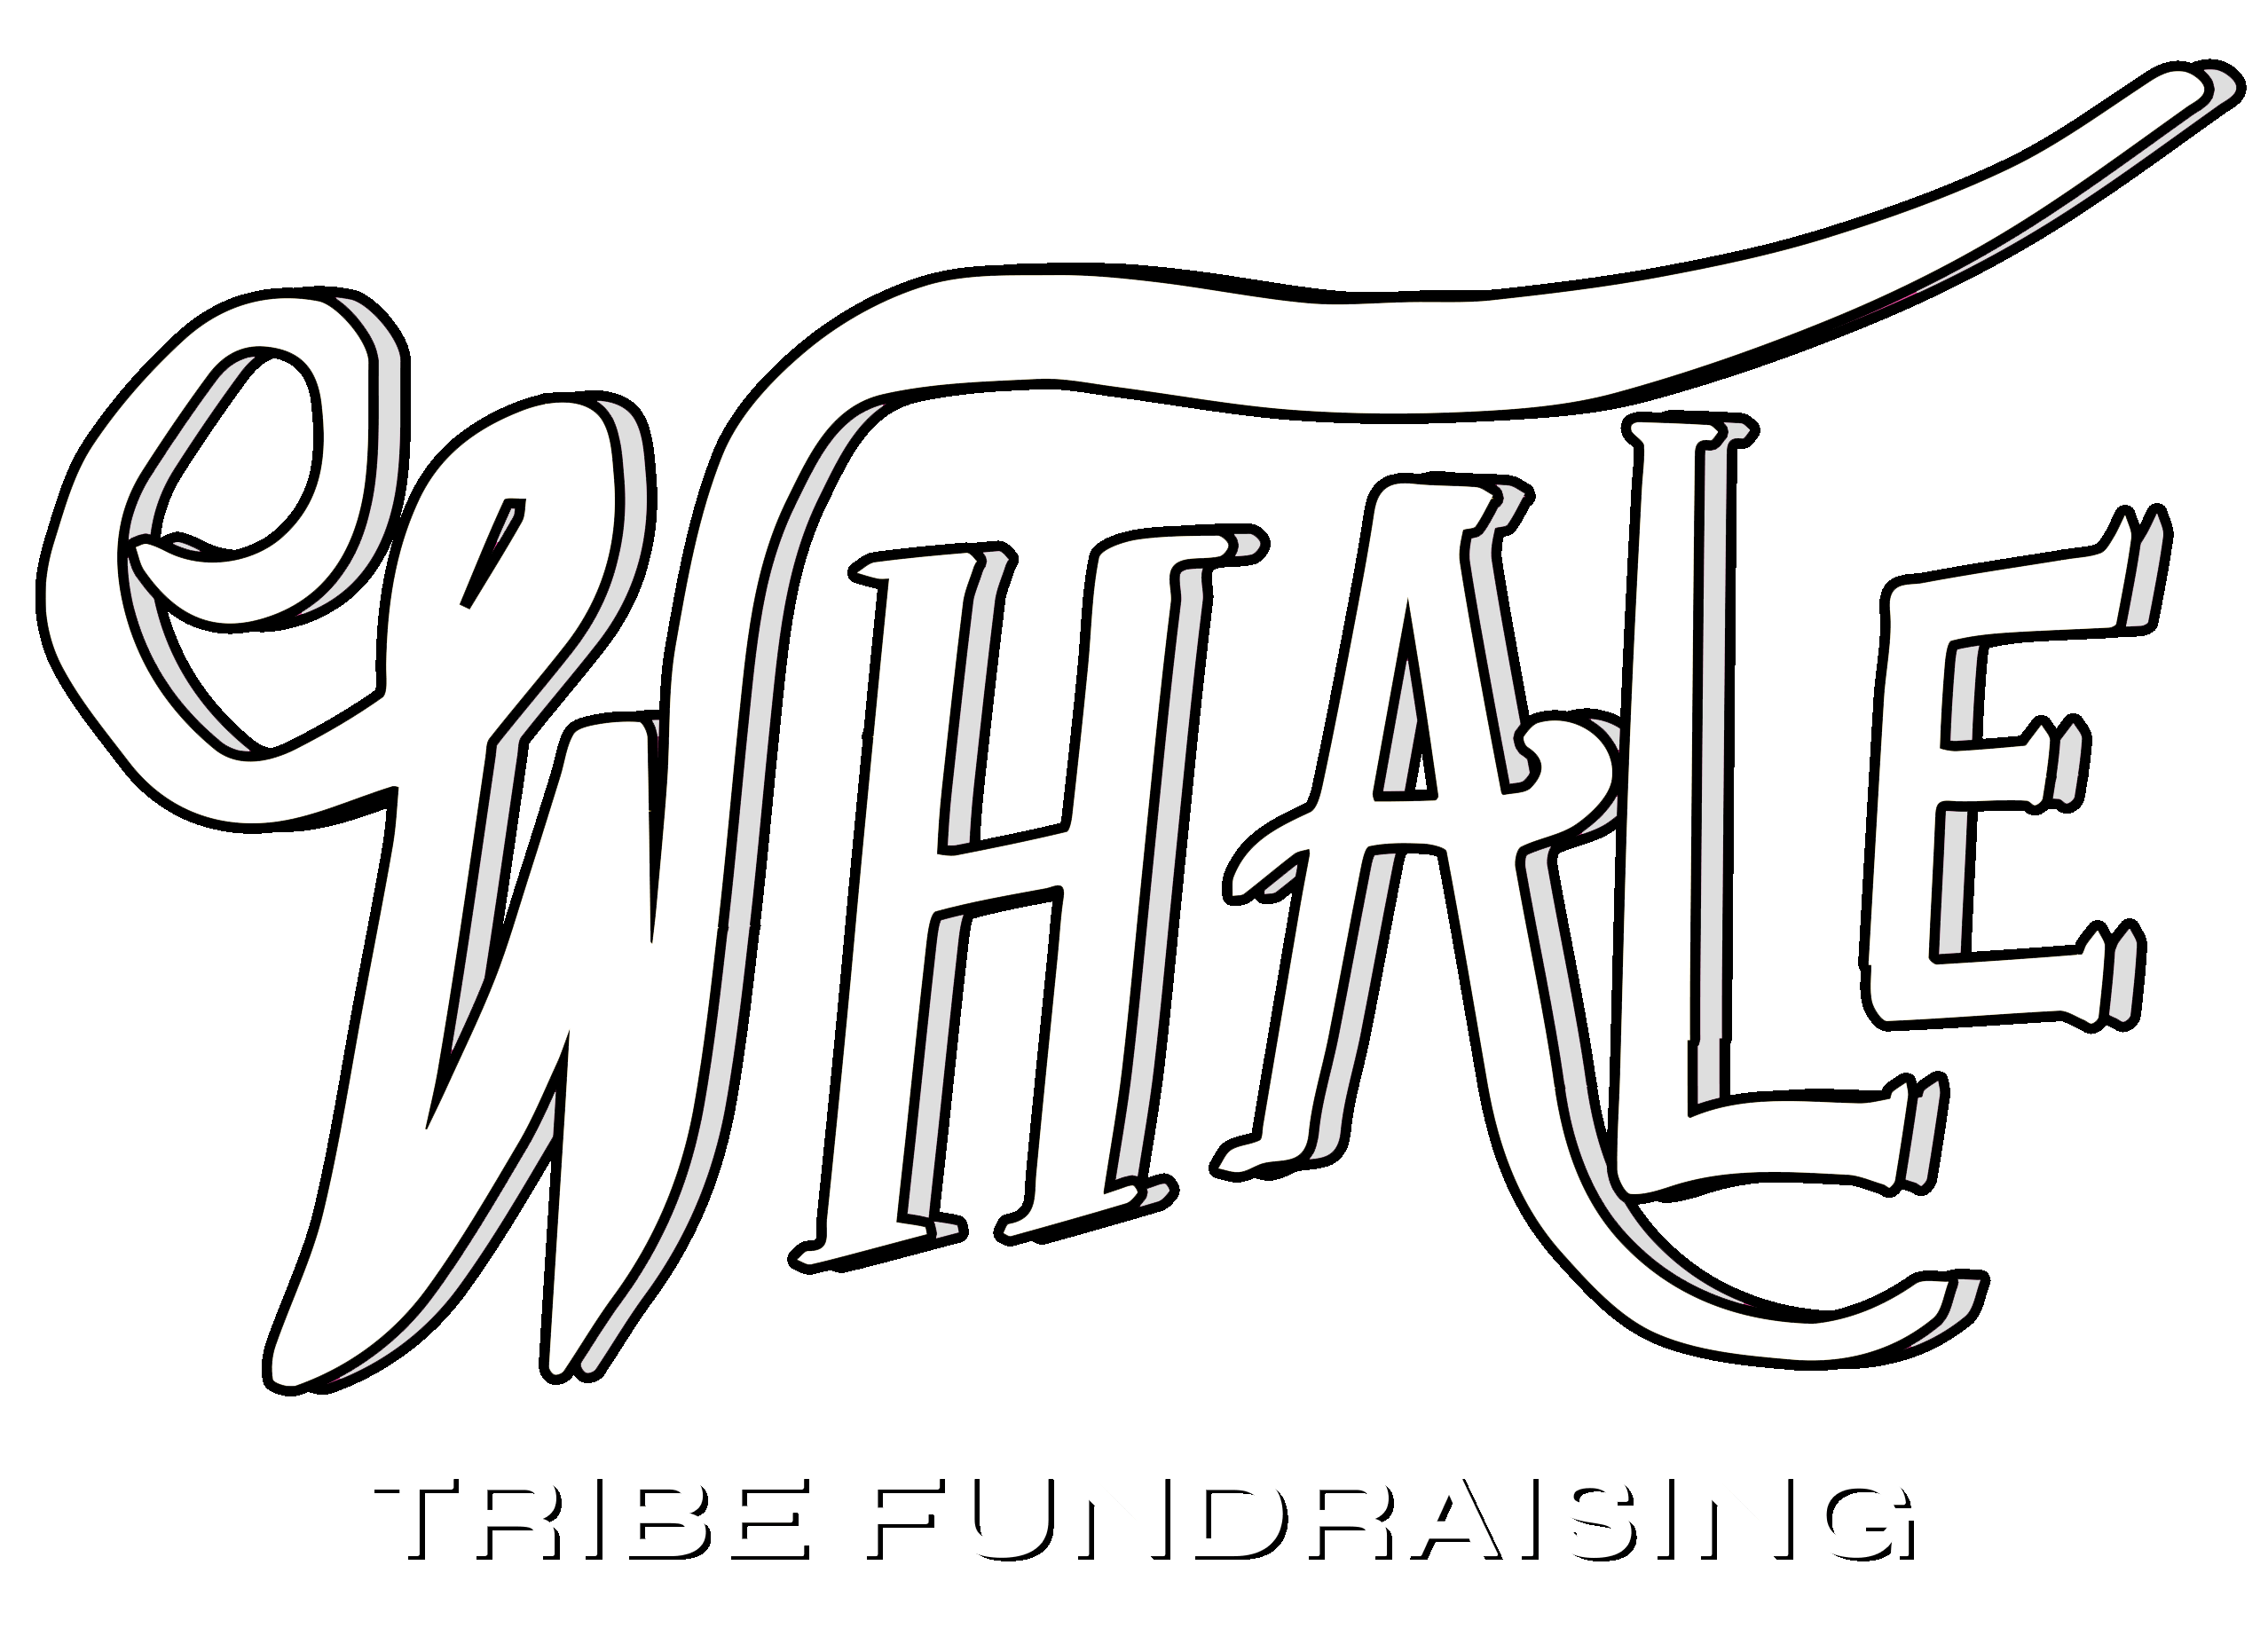 Whale_tribe_fundraising_acs